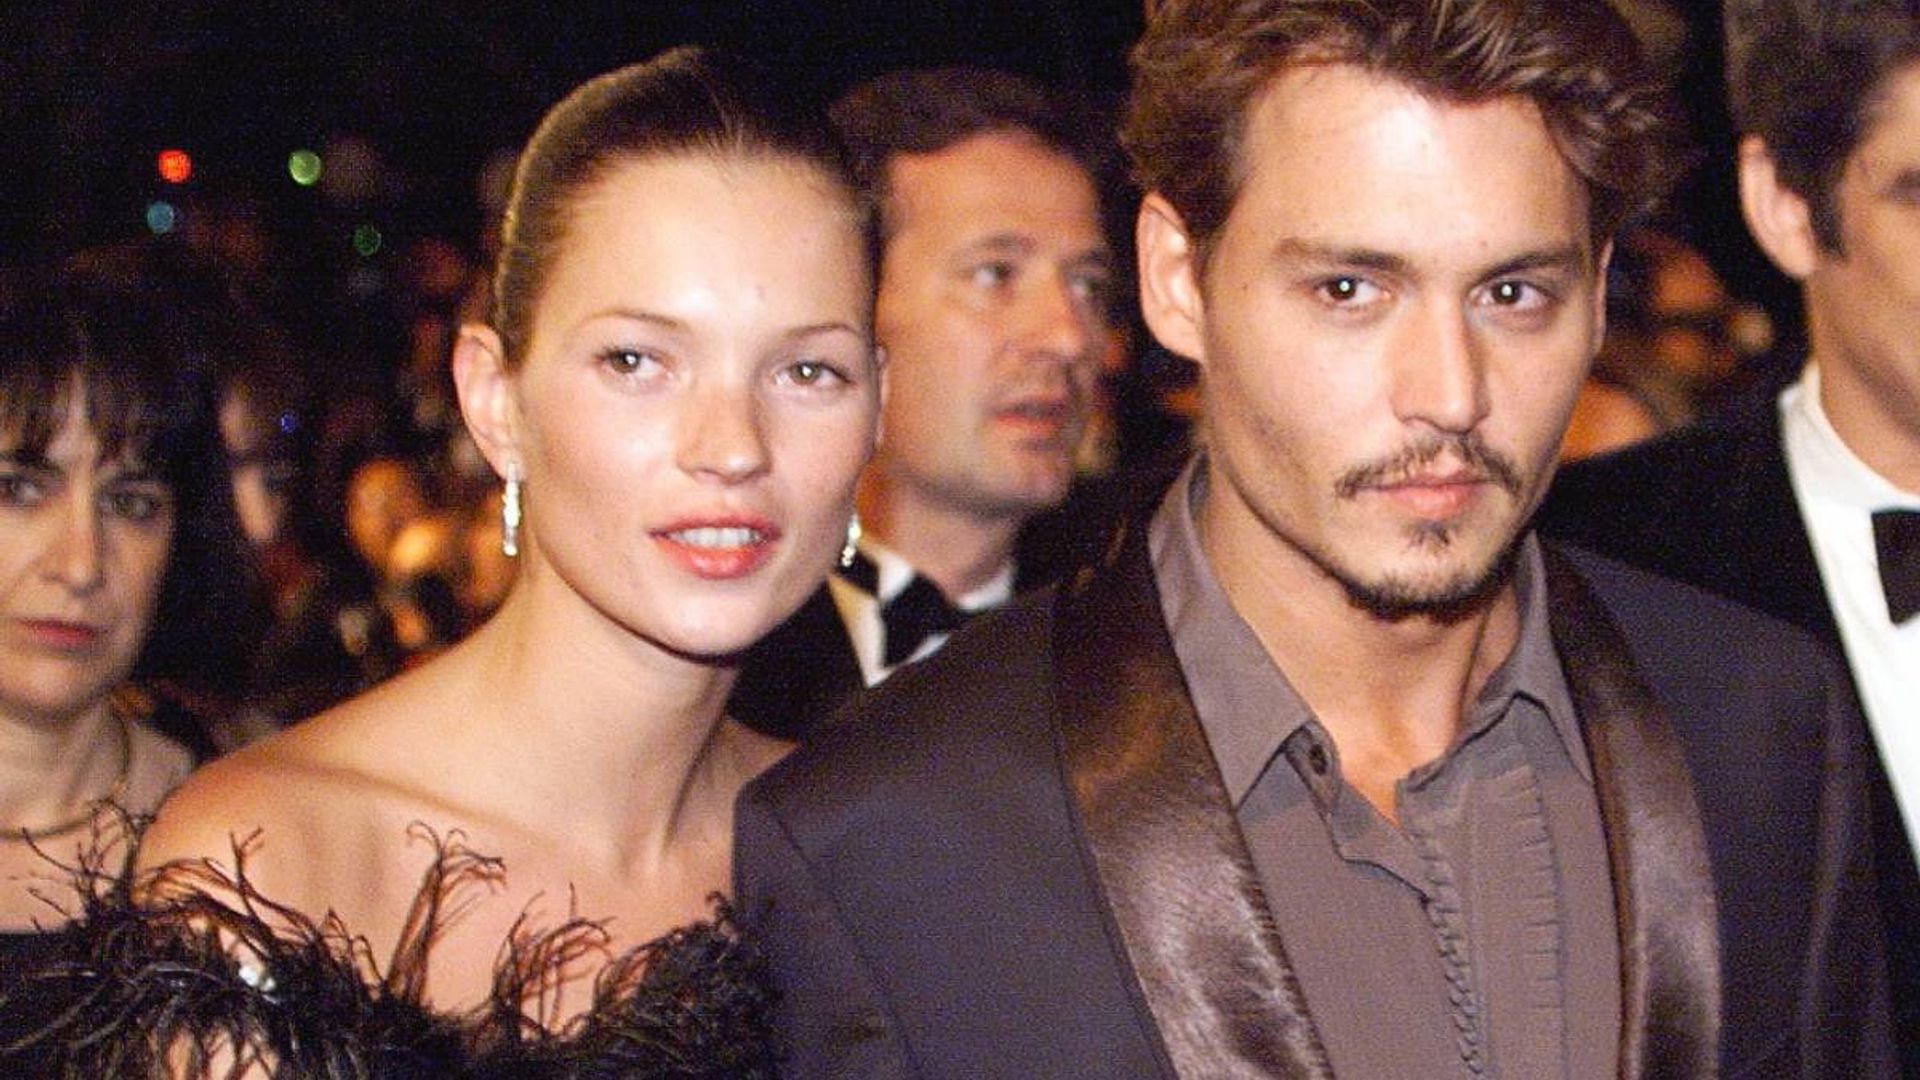 Kate Moss 'will appear' at Johnny Depp defamation trial